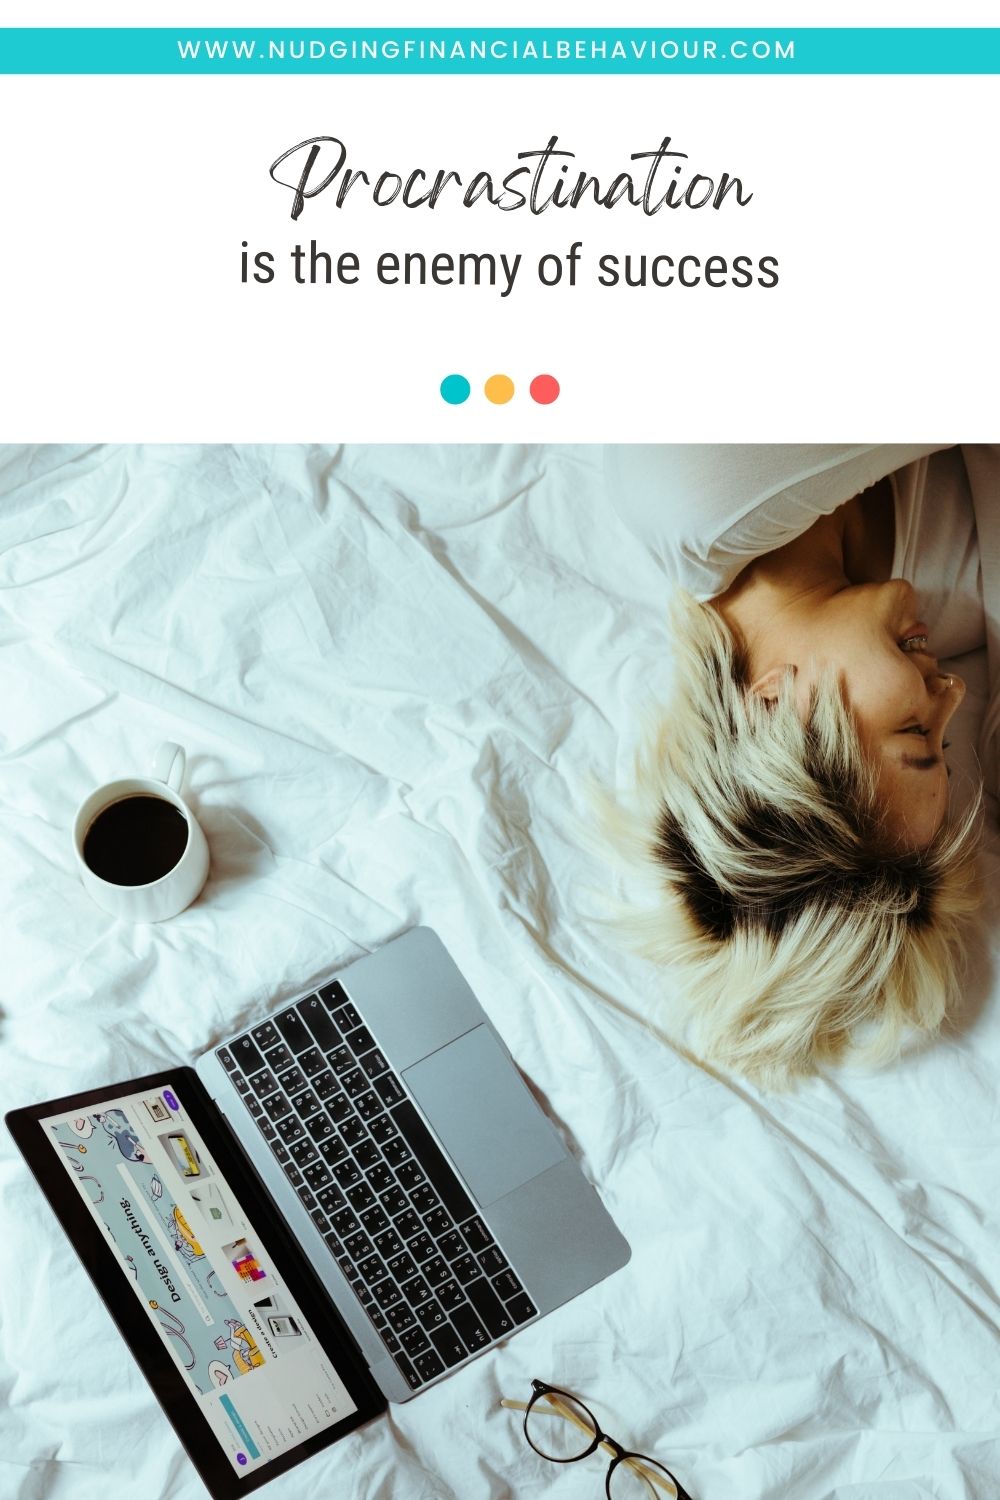 Procrastination is the enemy of success